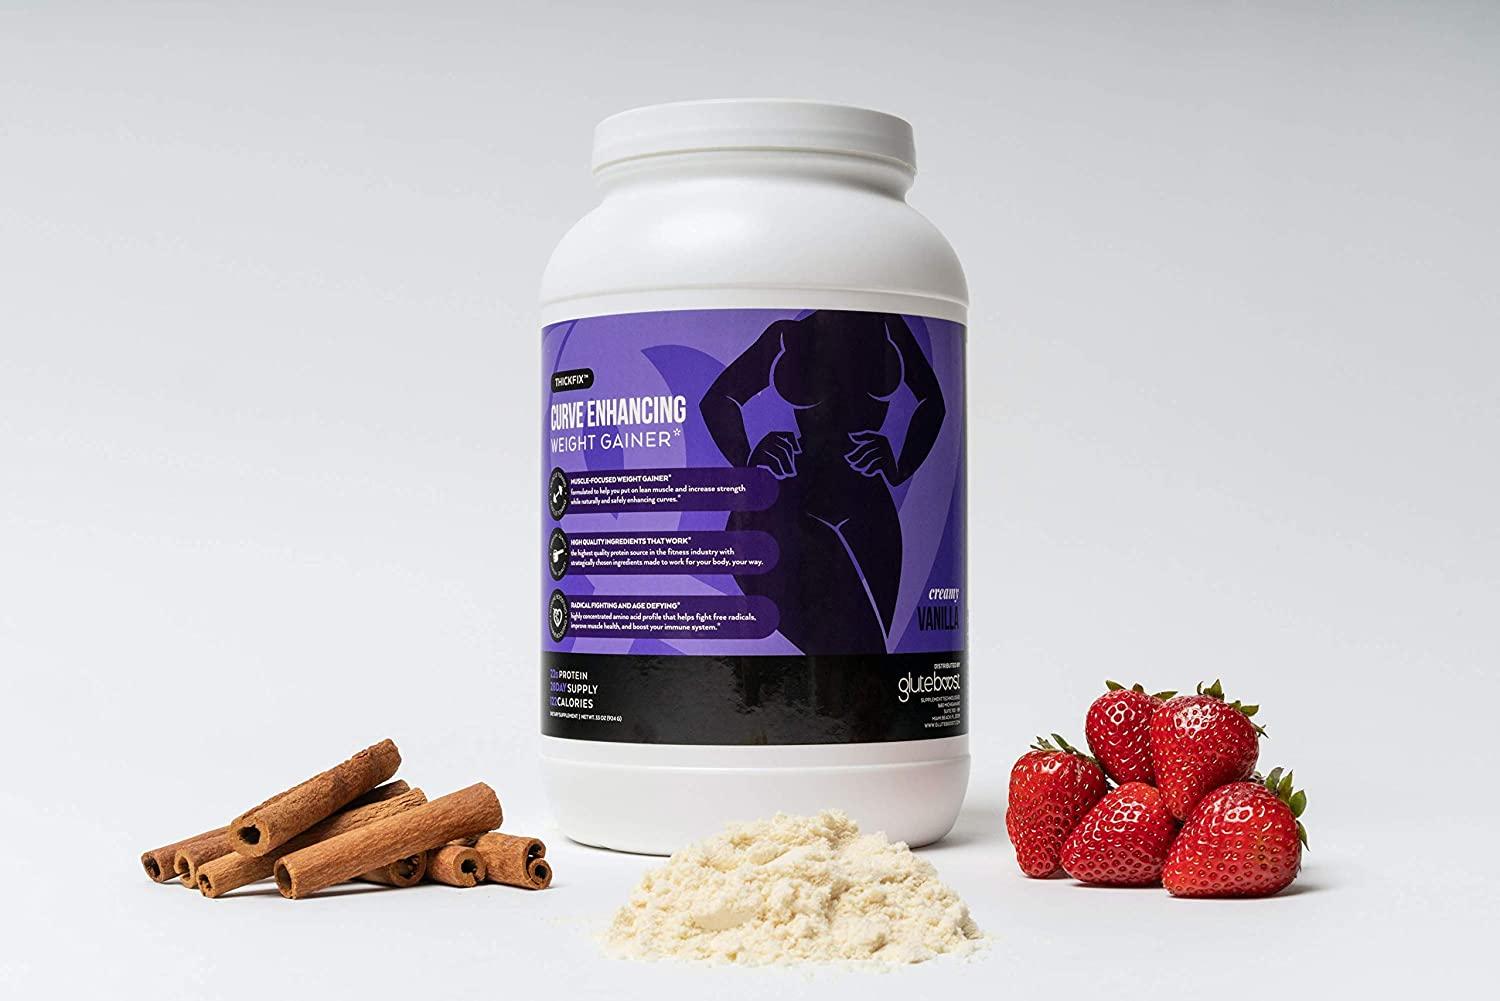 Gluteboost - ThickFix Combo Kit - Natural Curve Enhancement Whey Protein  Shake and Cream - Increase Curves and Muscle